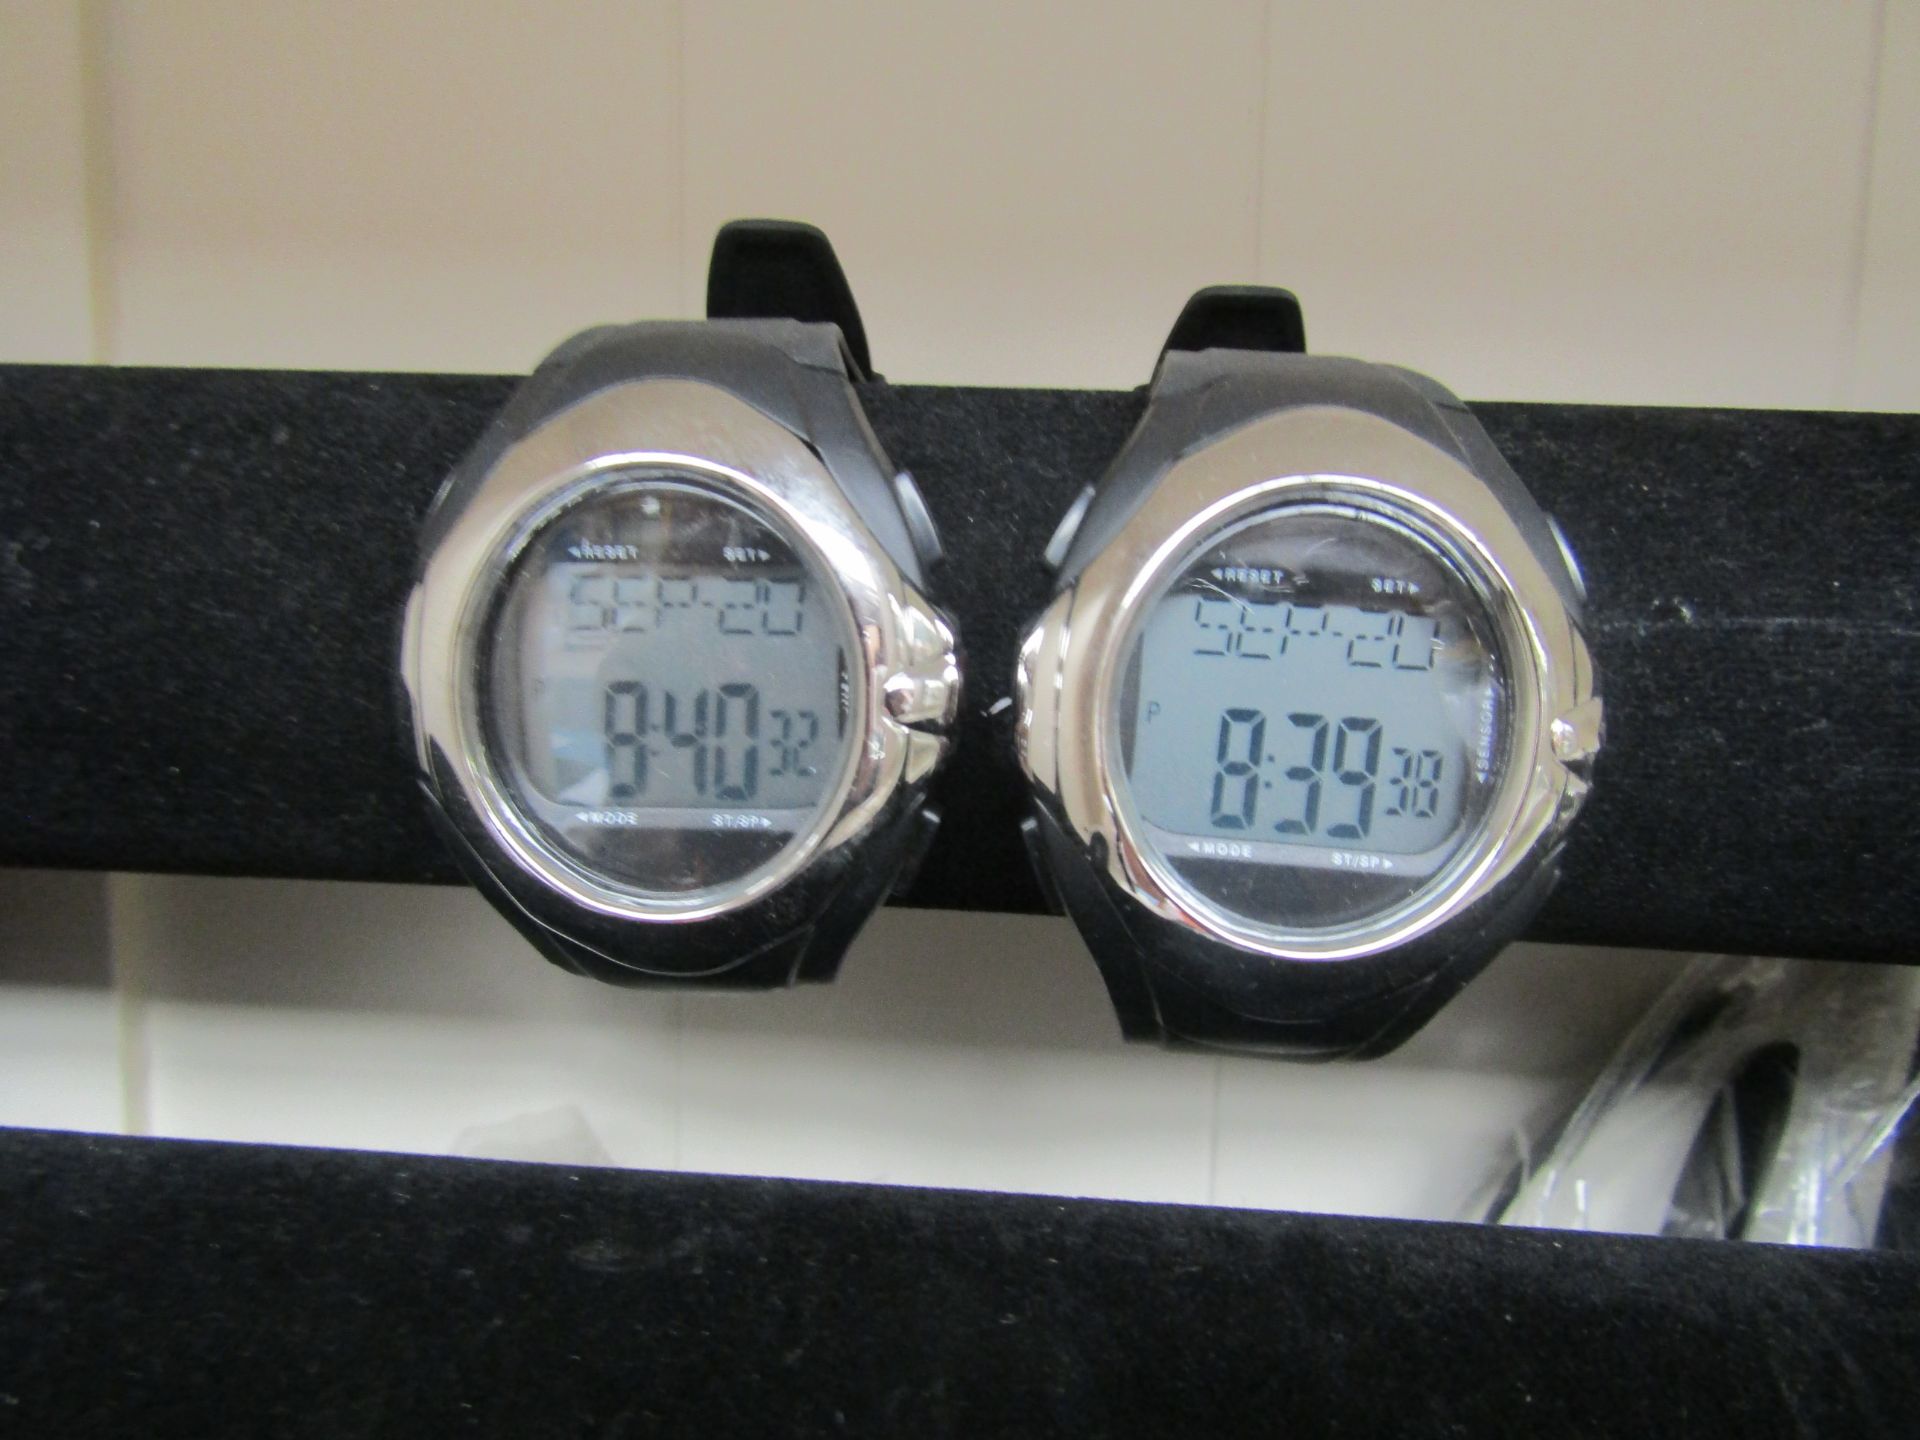 2x Designer Habitat Pulse rate watches, new and working